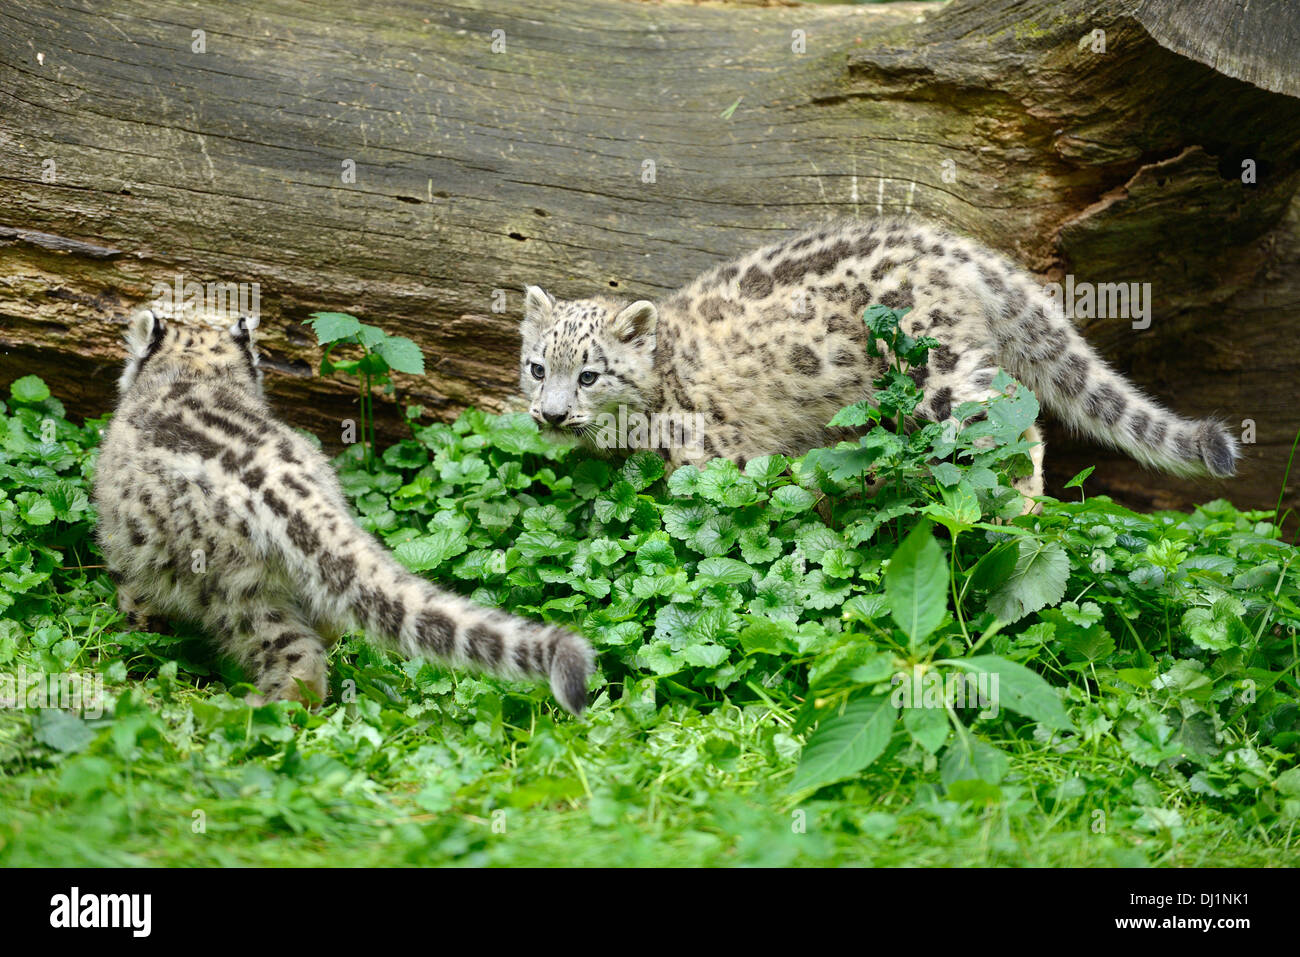 Snow Leopard Panthera unica Two cubs zoo Stock Photo